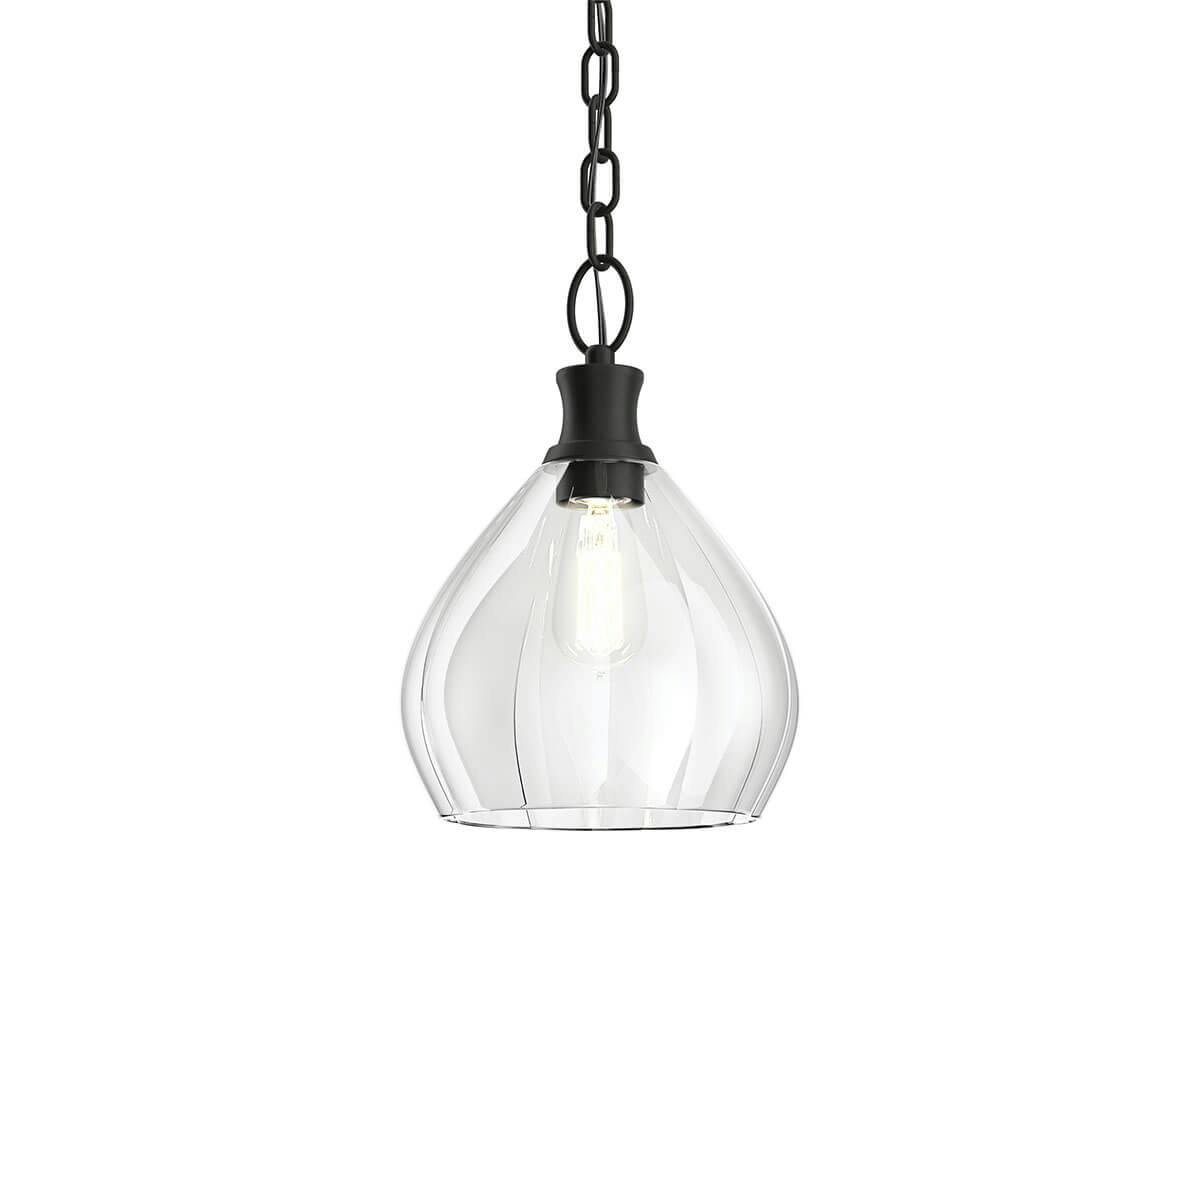 Merriam 8" 1 Light Pendant Black without the canopy on a white background